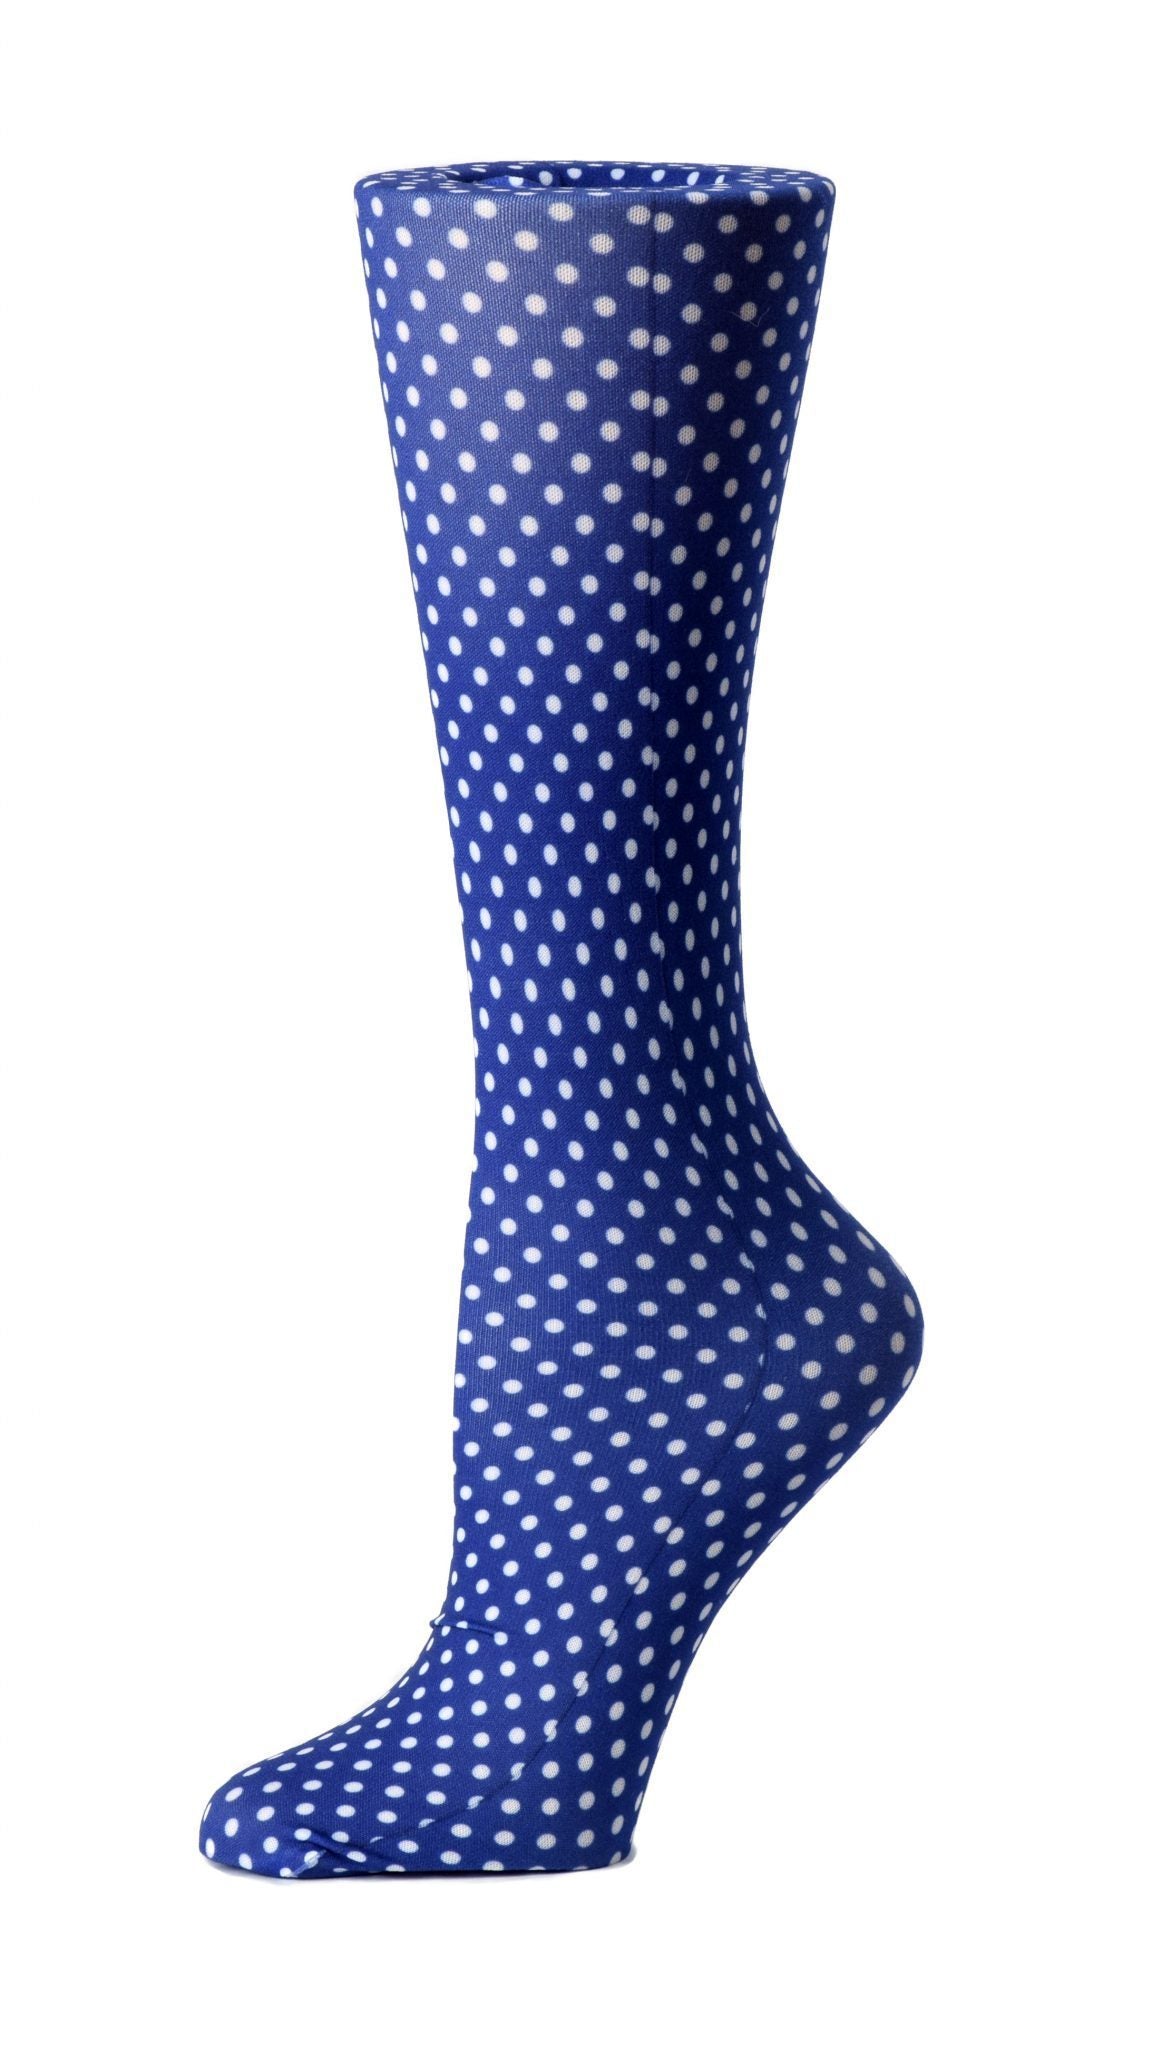 Cutieful Moderate Compression Socks 10-18 mmHg Knit in Print Patterns Blue Polka Dot at Parker's Clothing and Shoes.